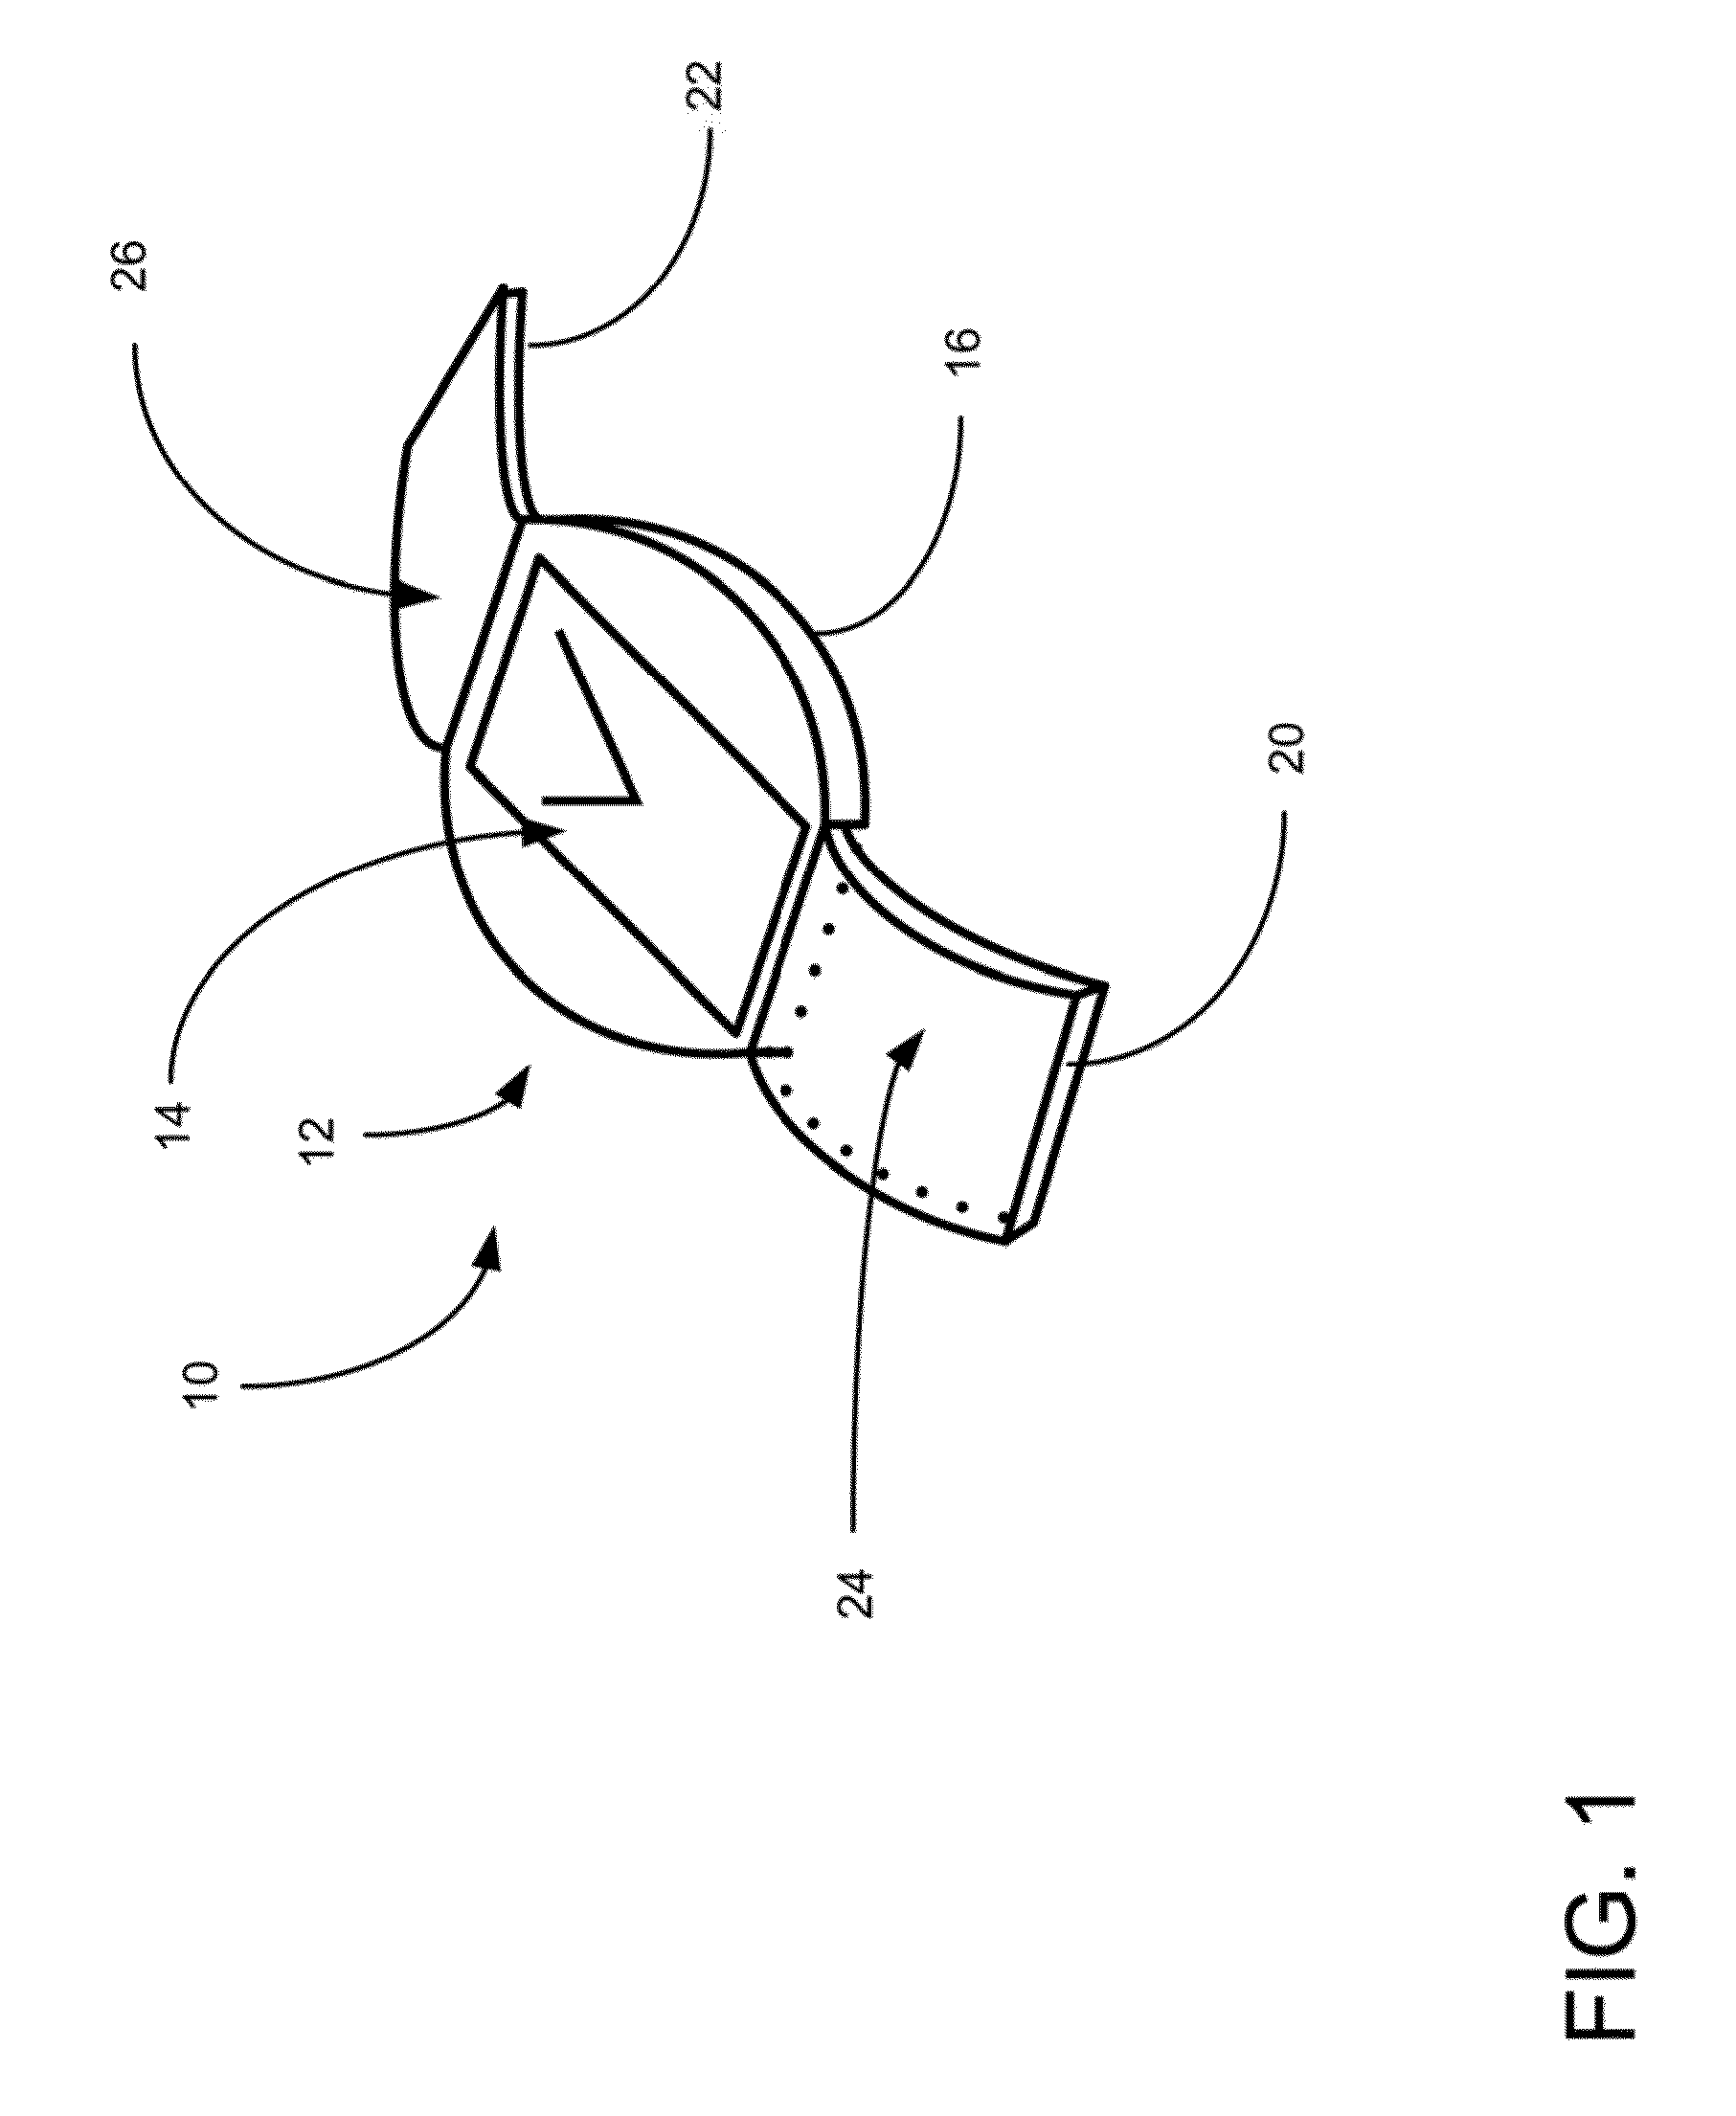 Apparatus utilizing projected sound in a mobile companion device